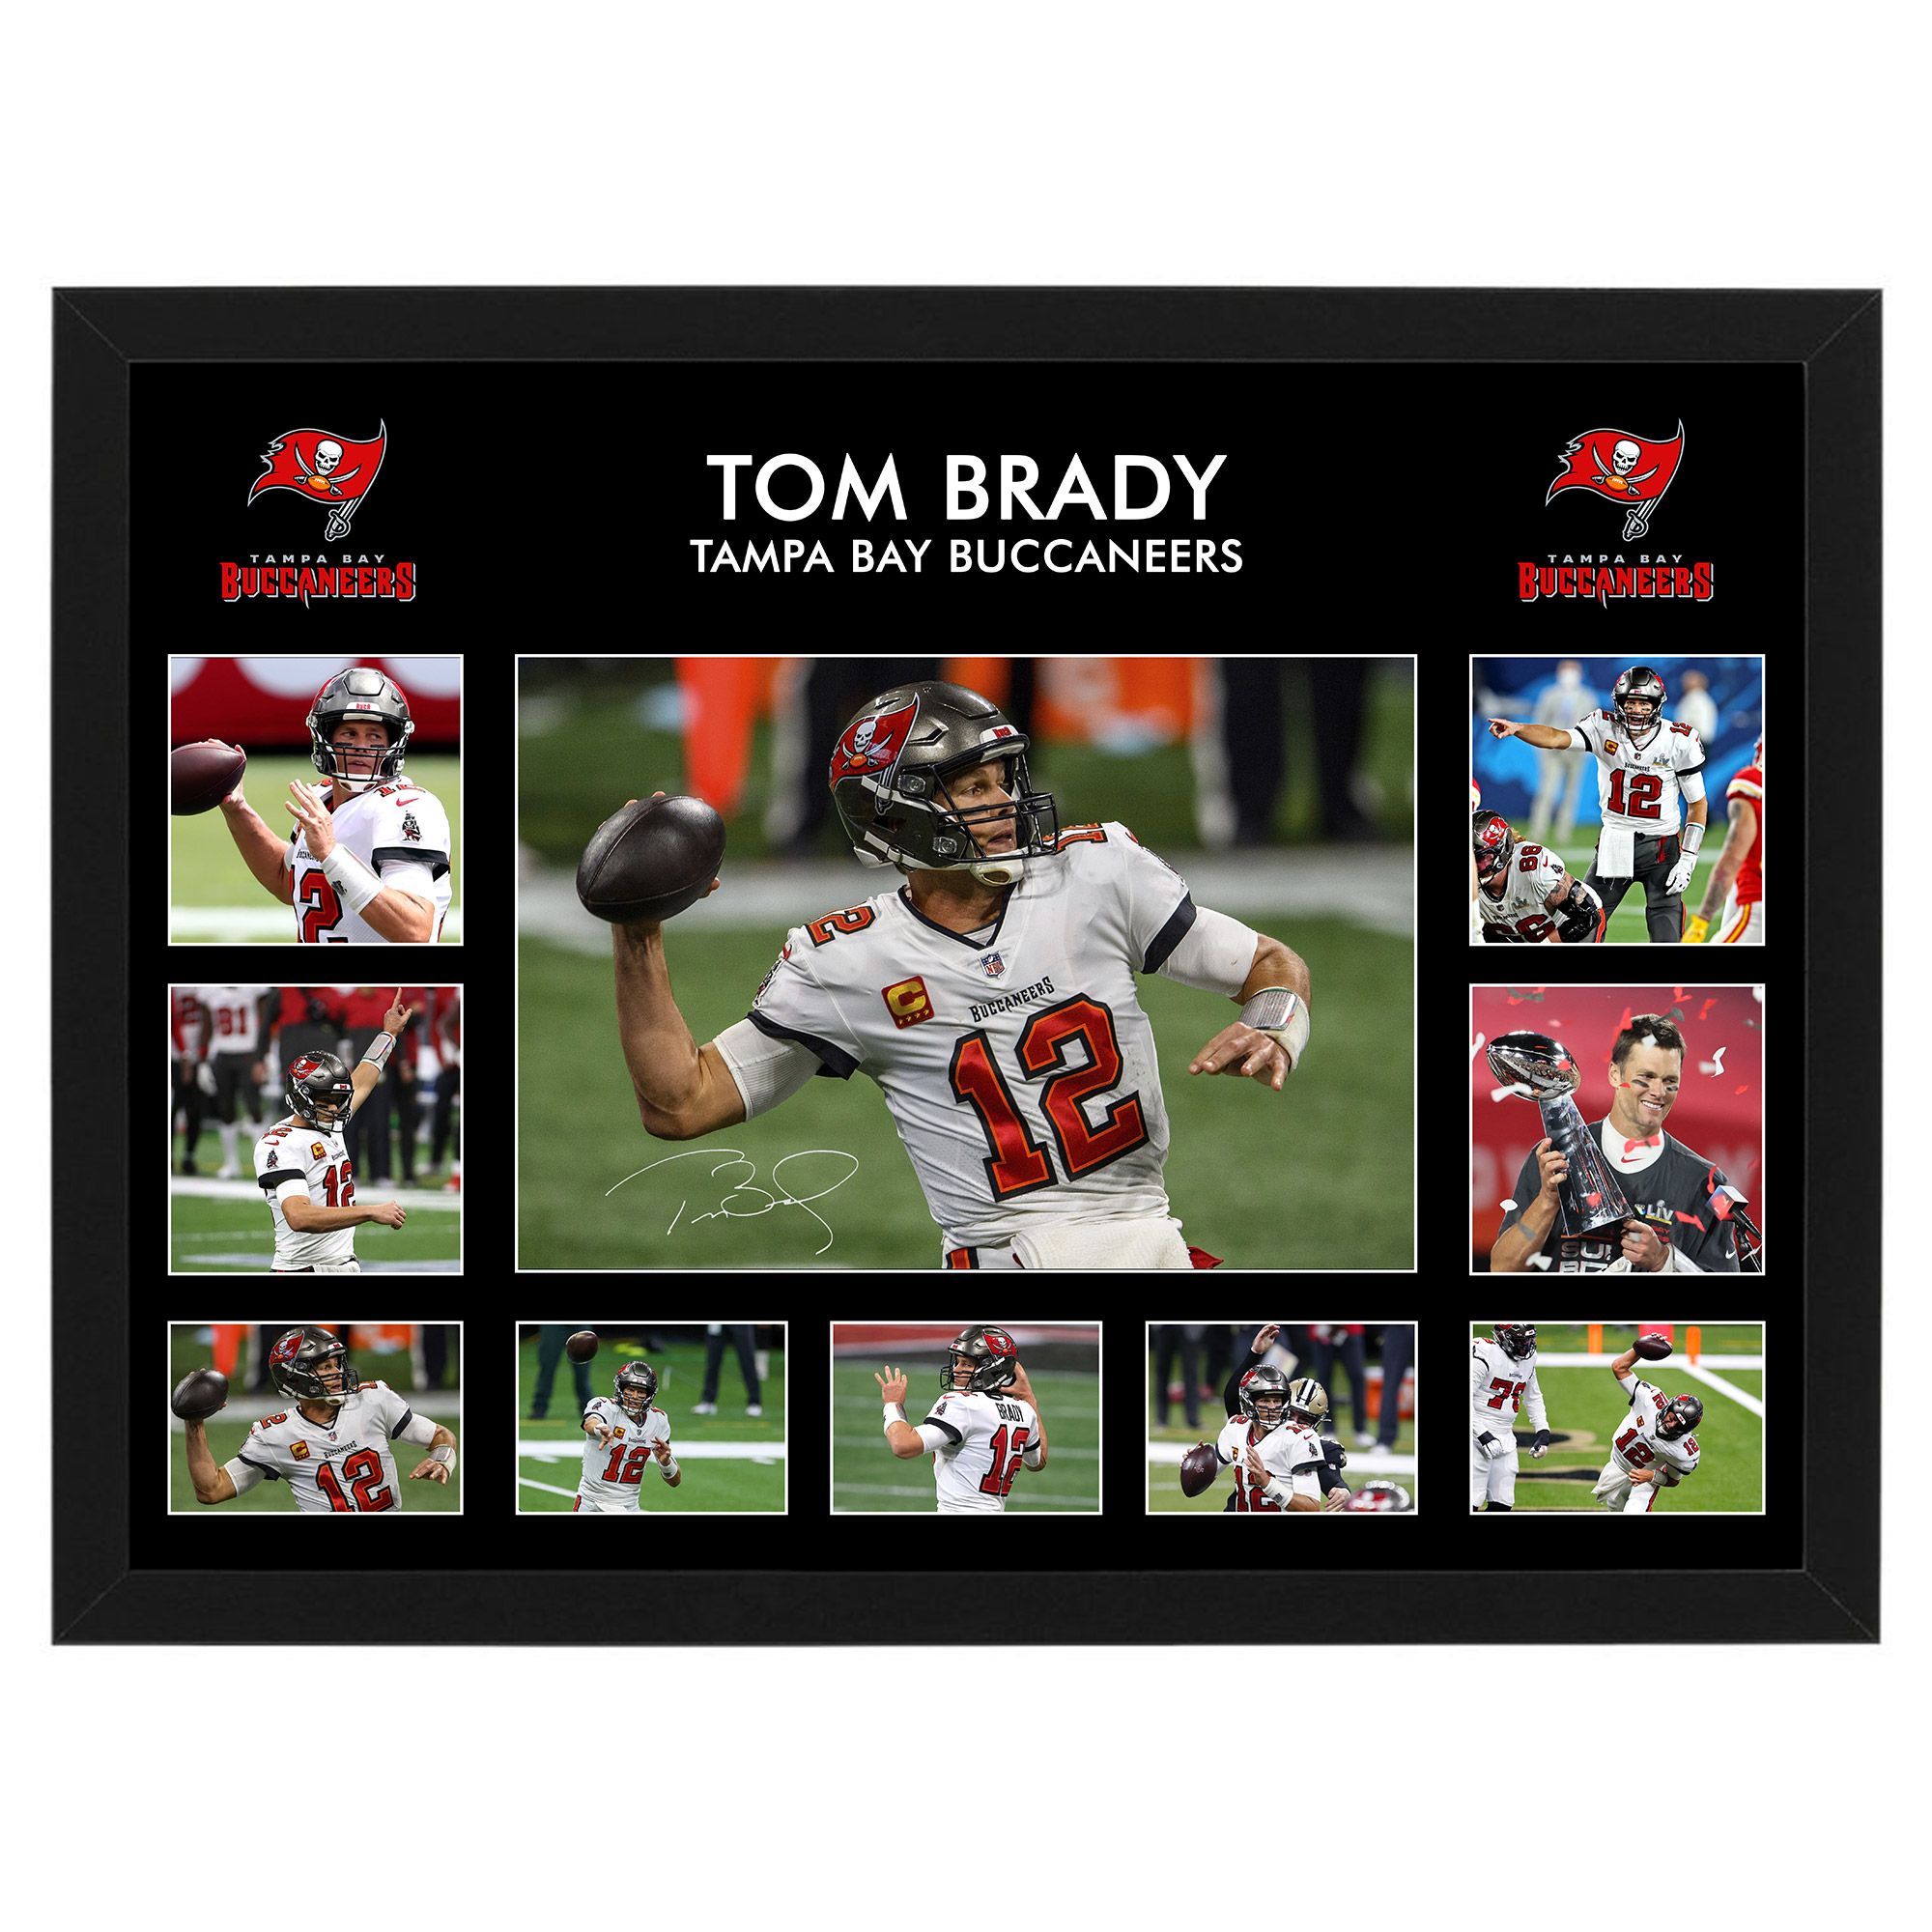 NFL – Tom Brady Tampa Bay Buccaneers Framed Large Photo Collage